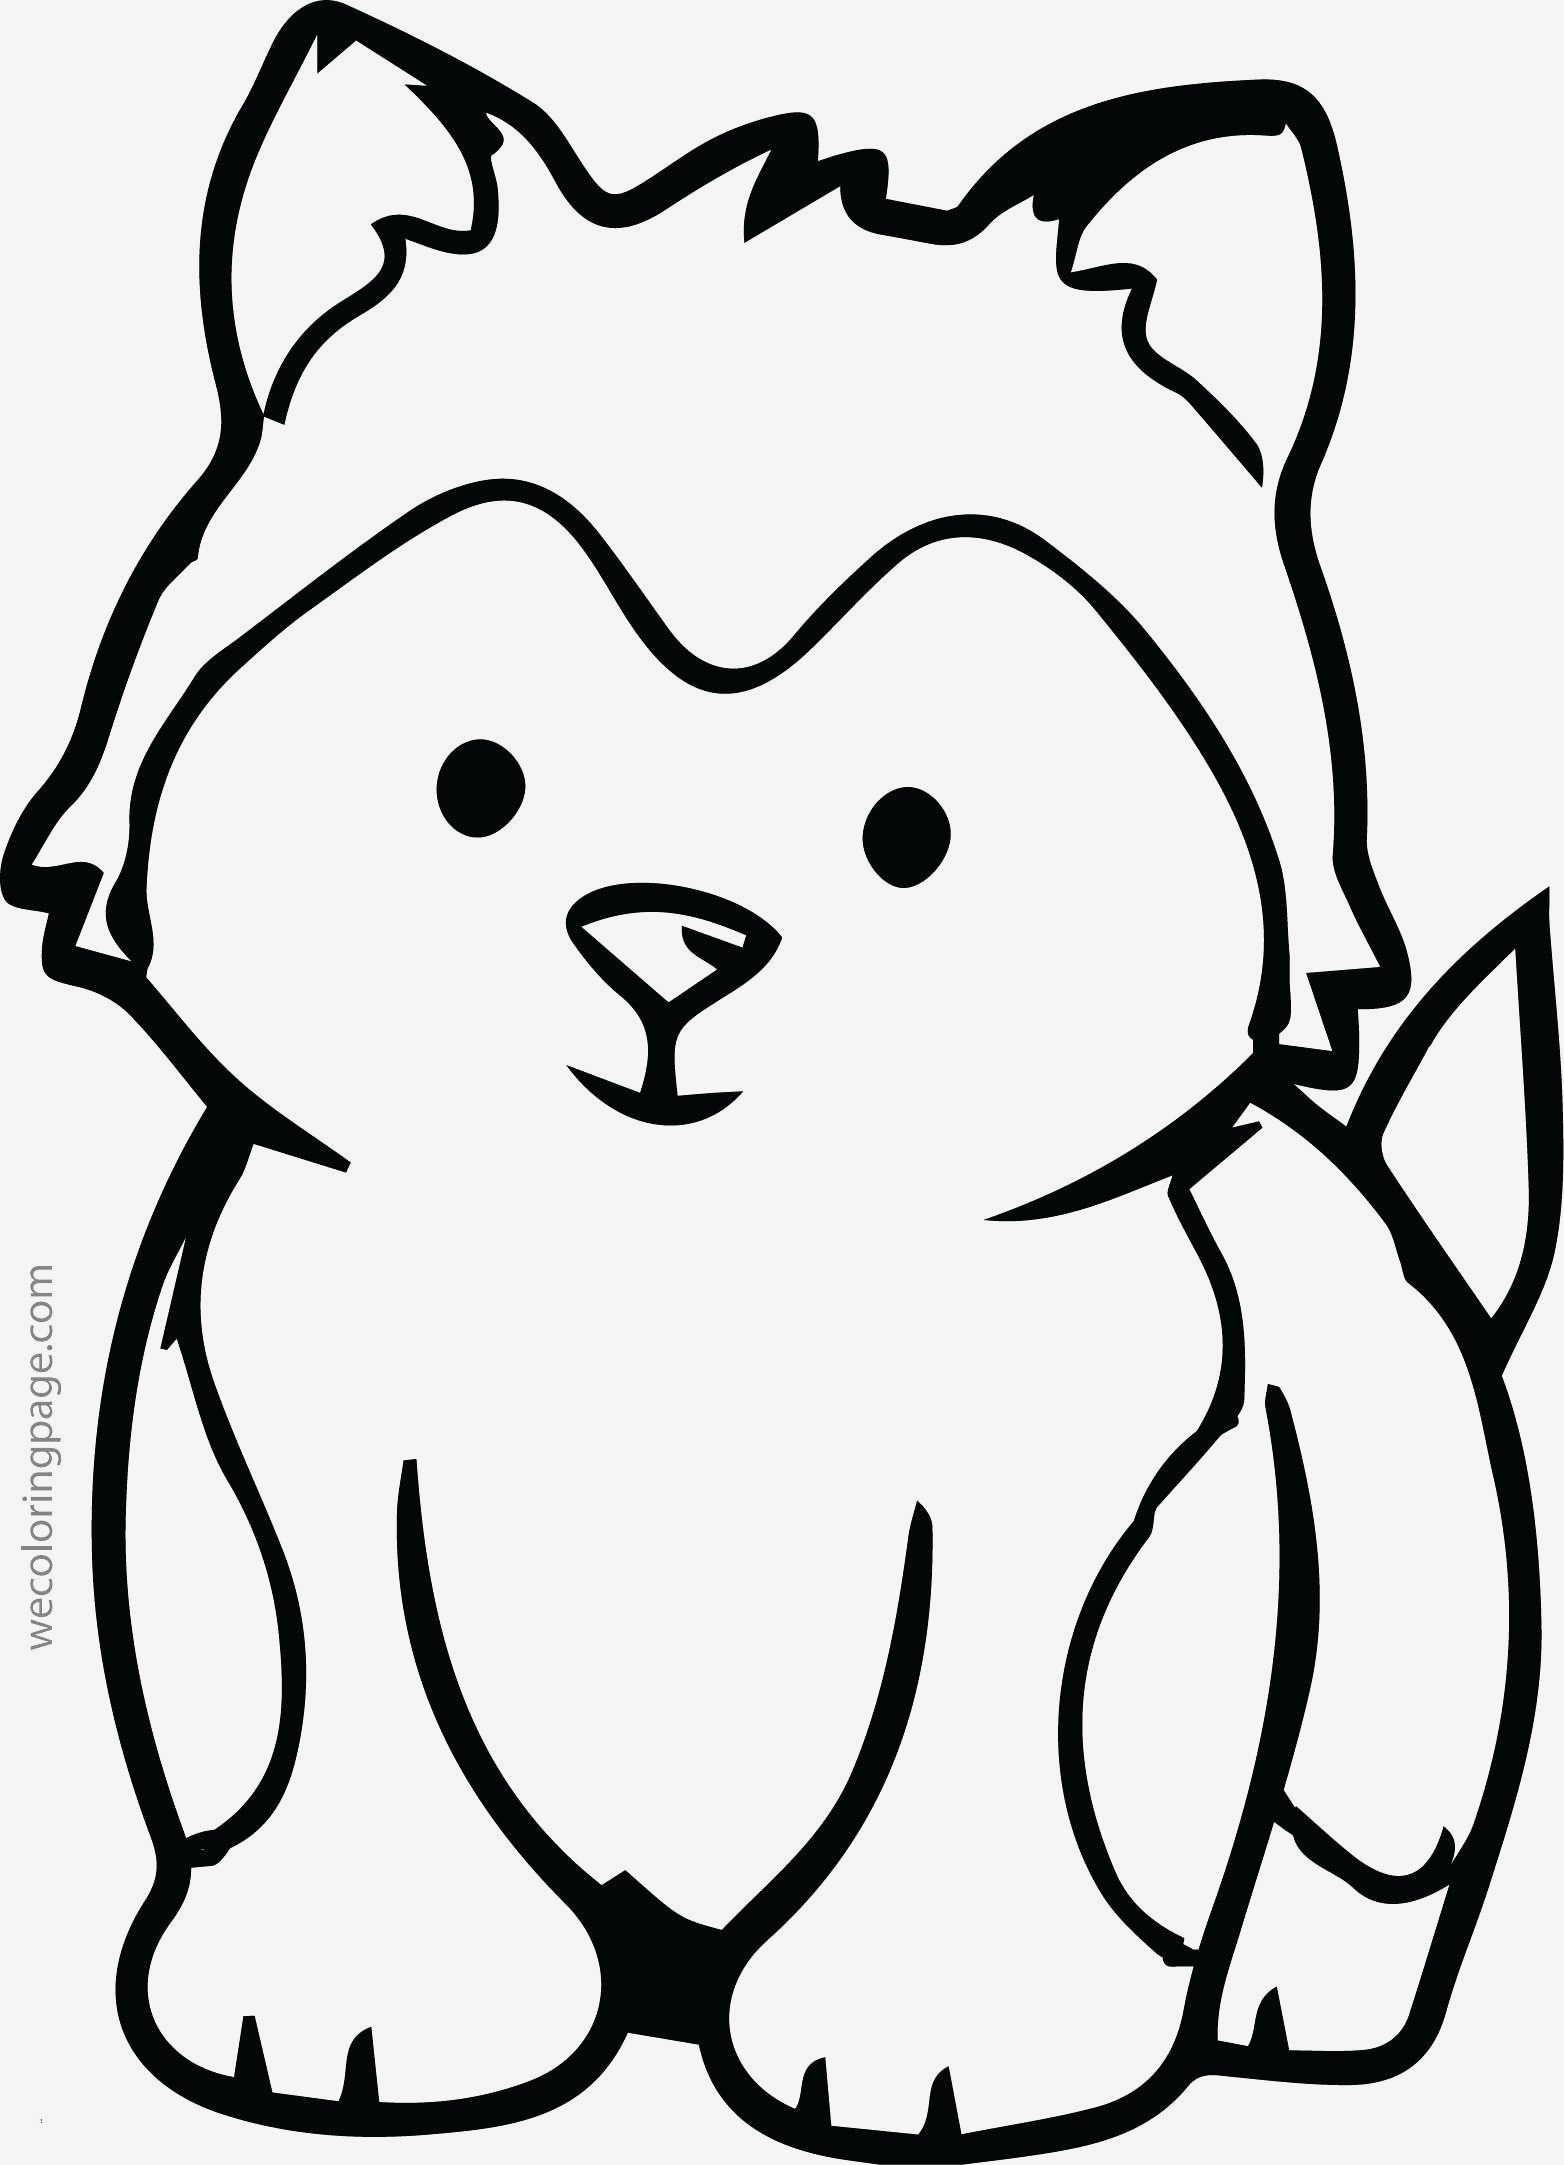 Hard Animal Coloring Pages Coloring Book Ideas Fabulous Adult Animal Coloring Book Such As